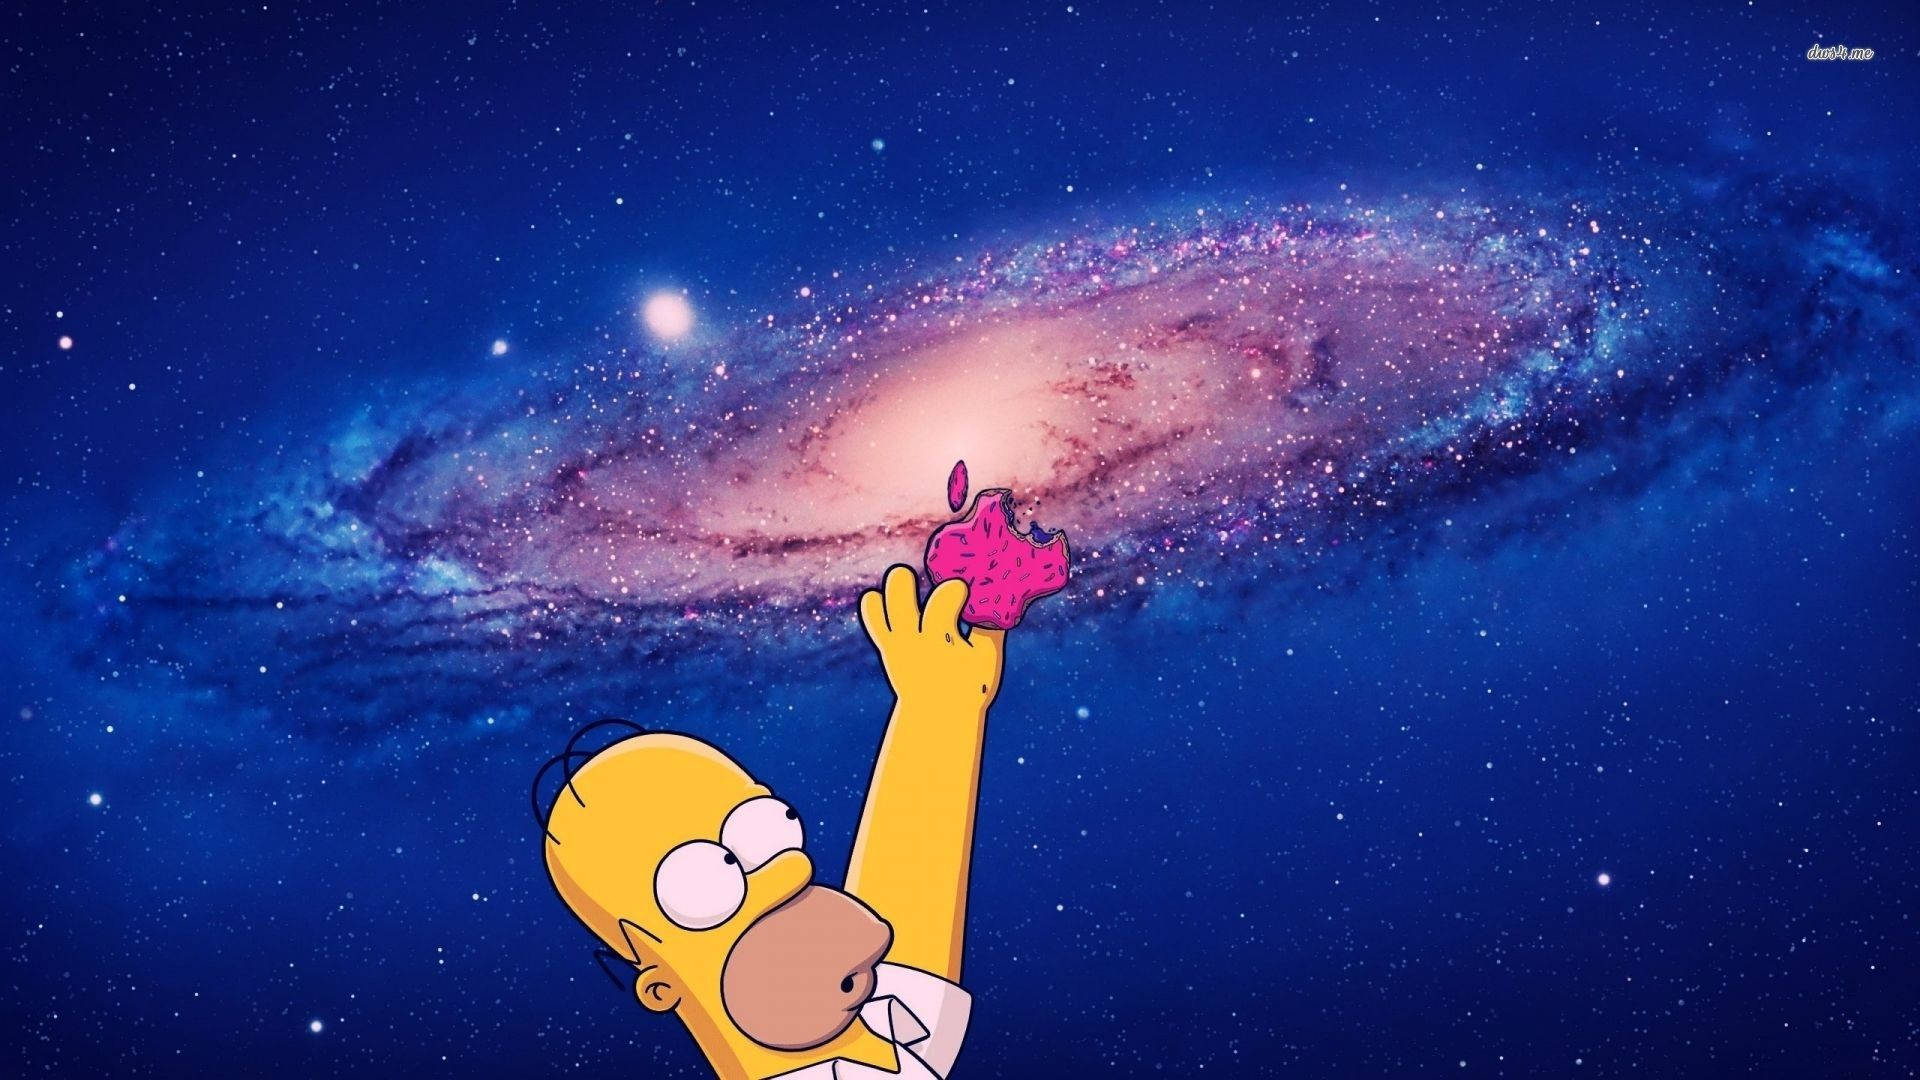 Download Homer Simpson Animated Hd Wallpaper 